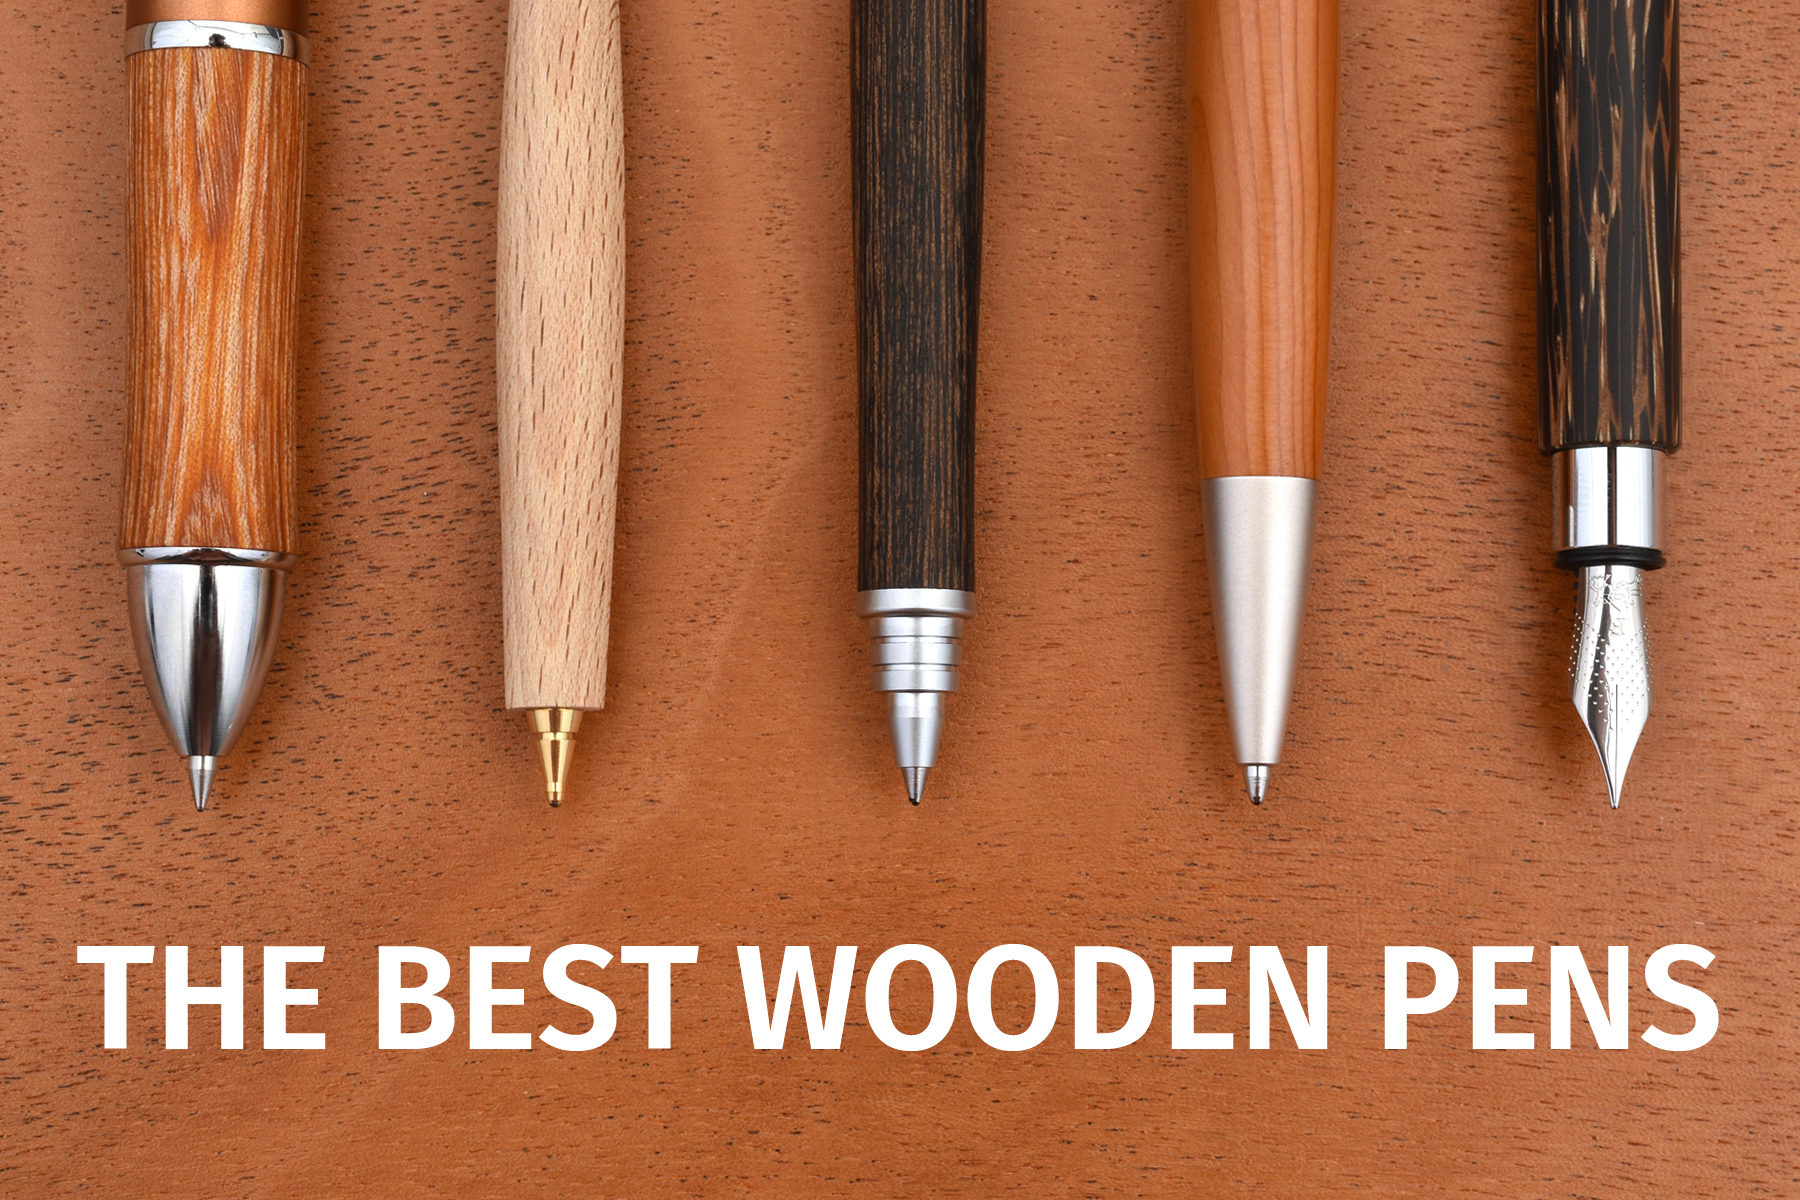 What Pen Should You Use For Writing On Wooden Pieces? 